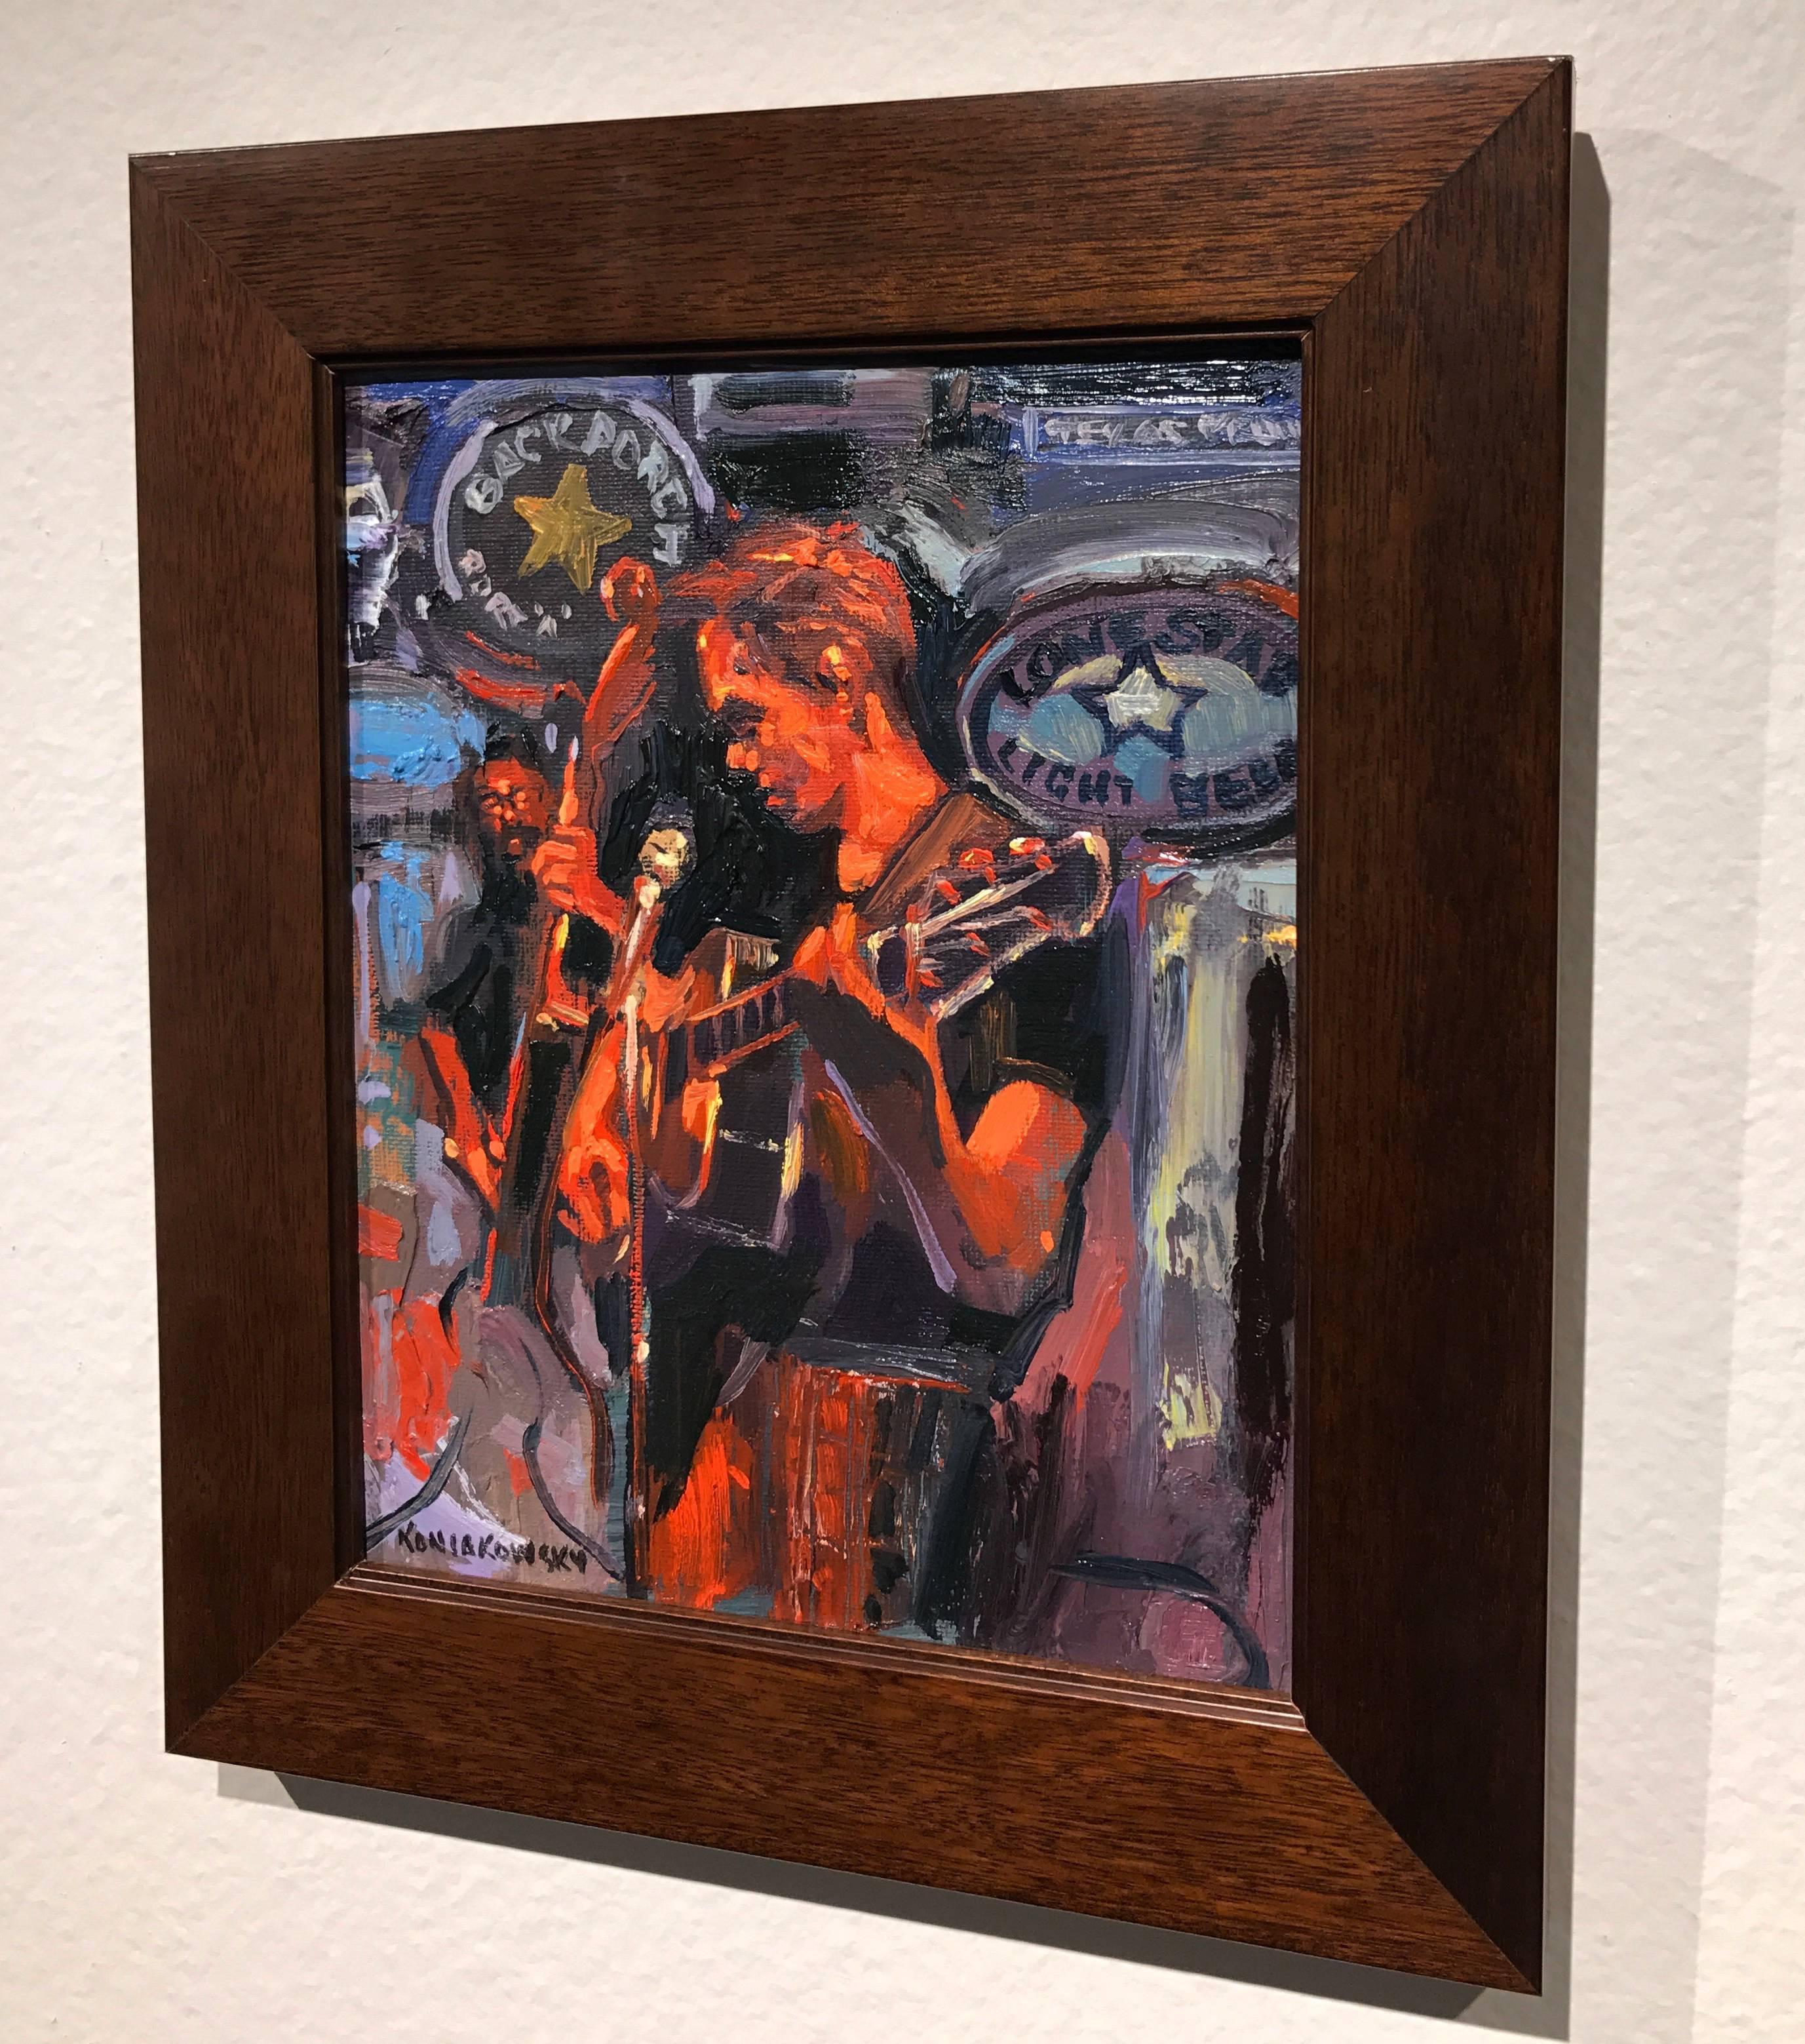 Live Music at the Porch - Painting by Wade Koniakowsky